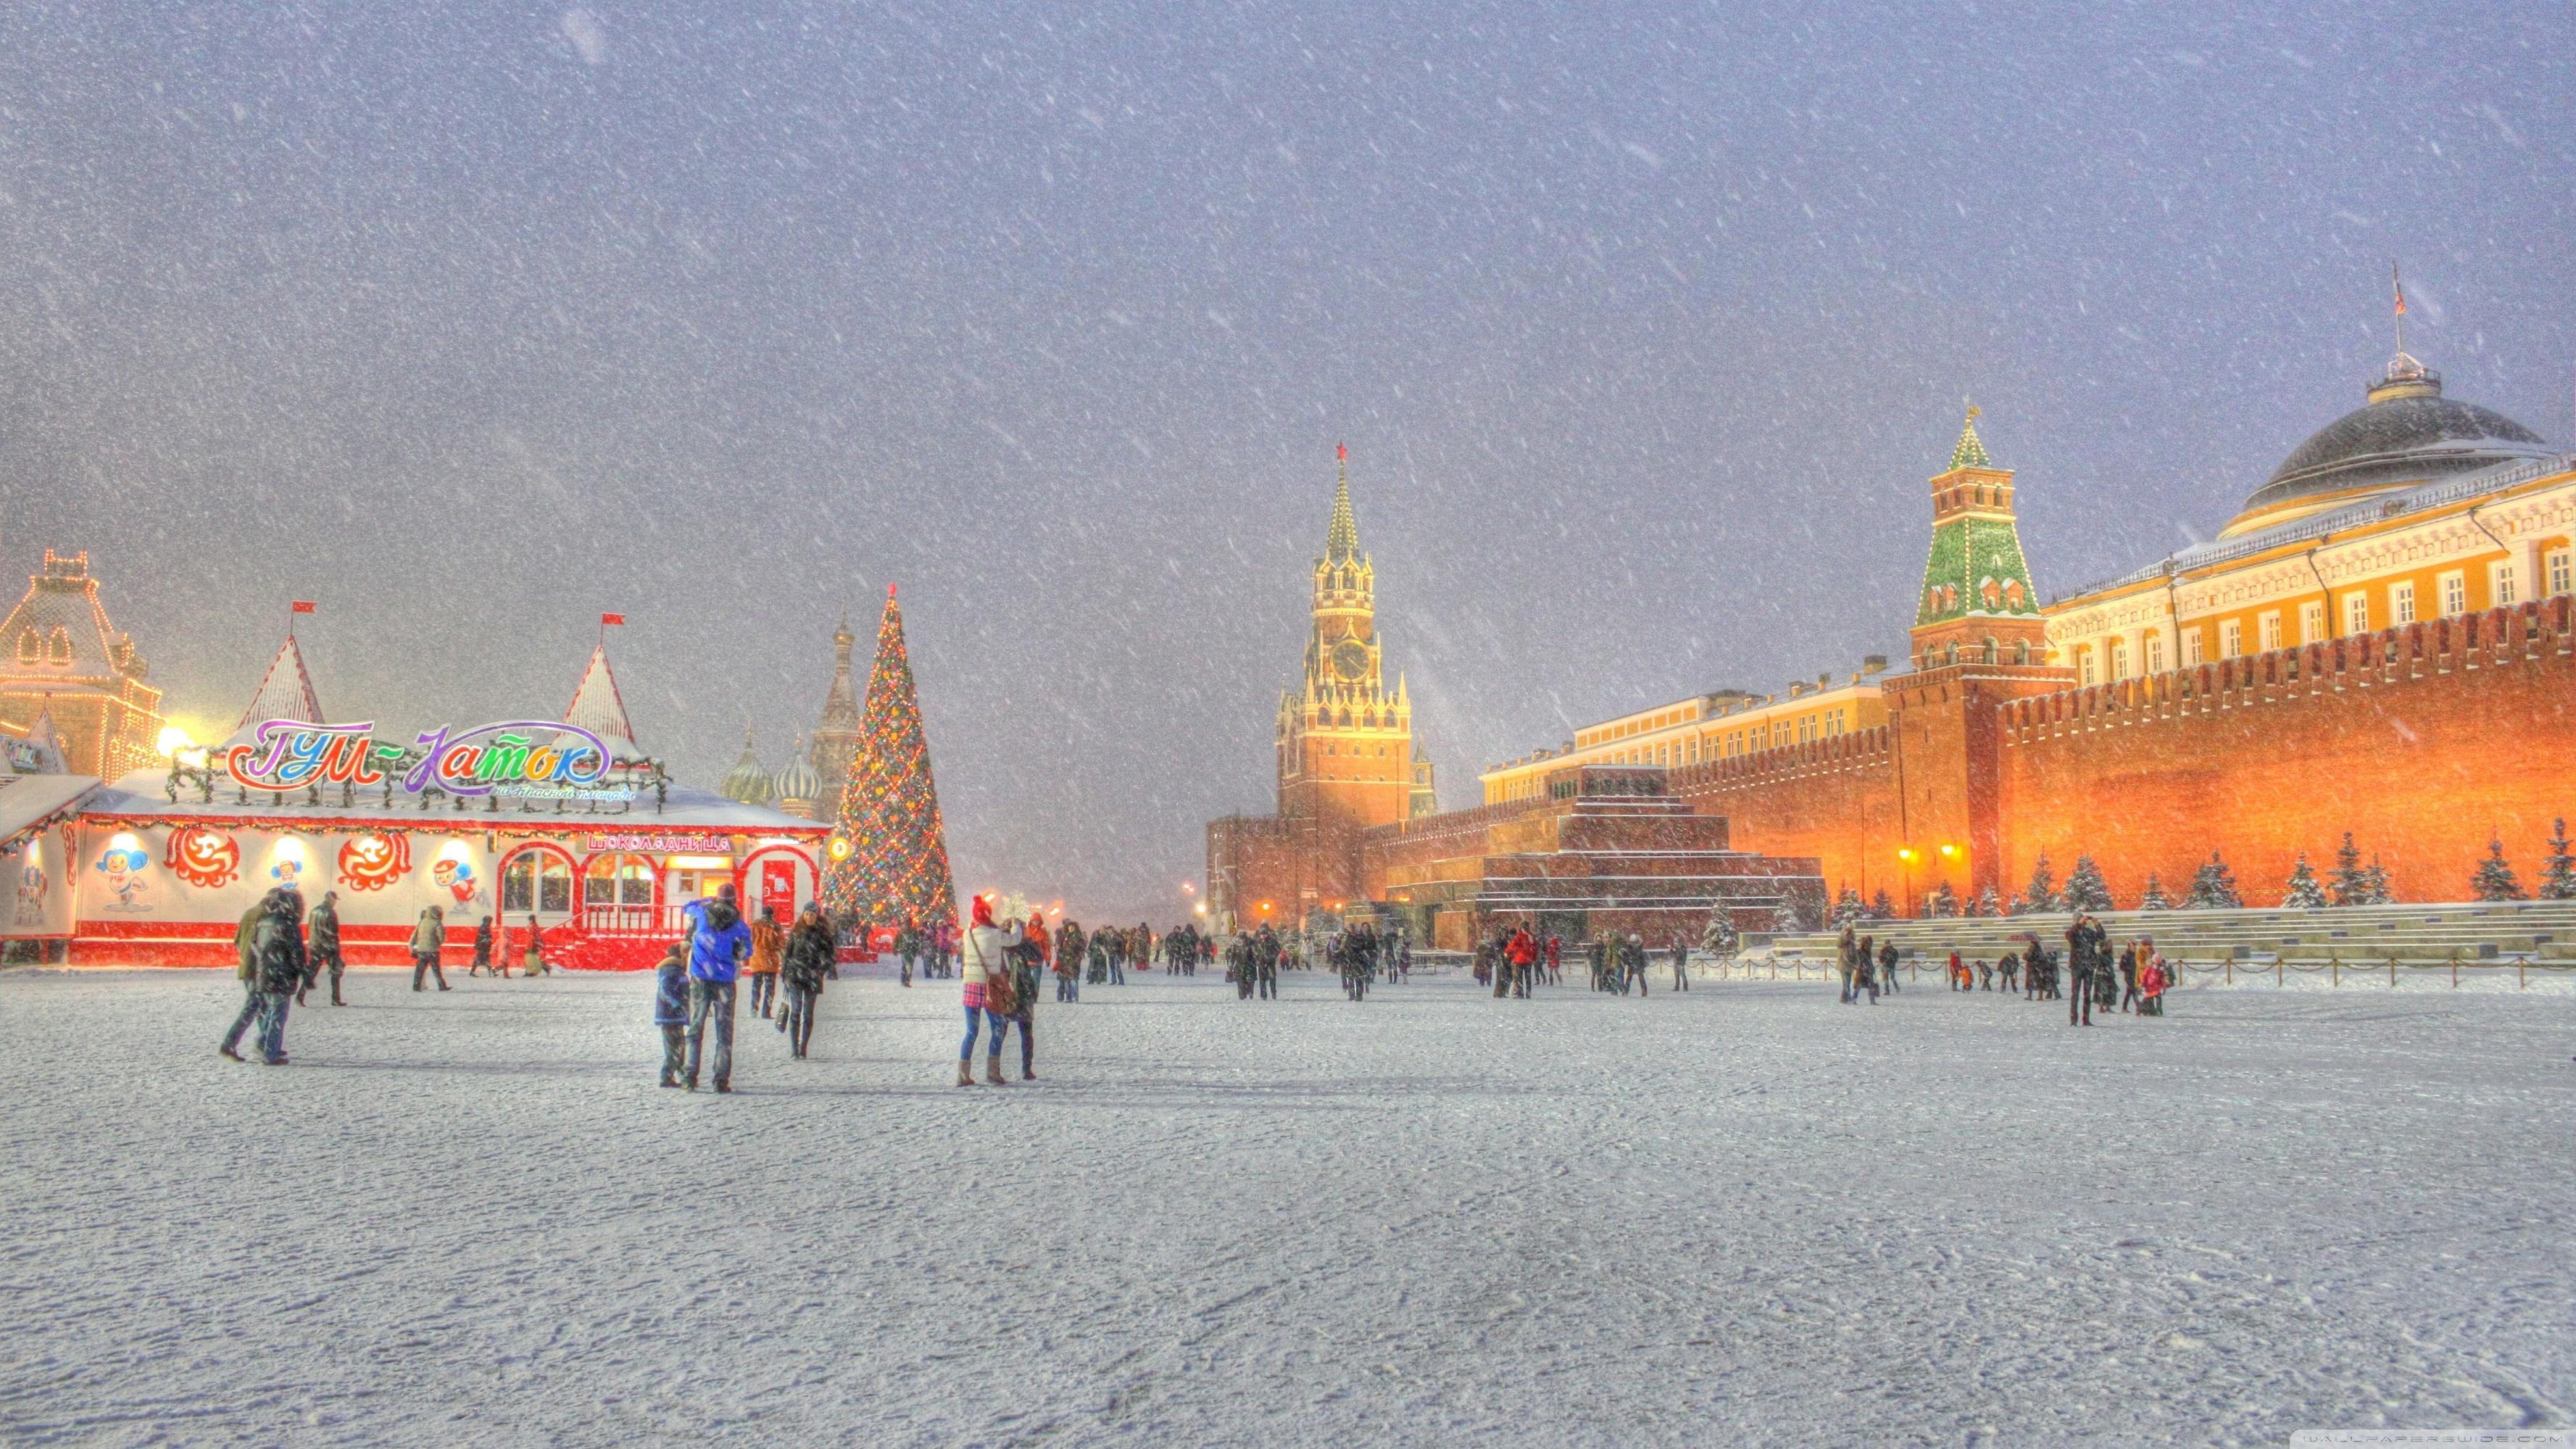 Red Square Moscow Russia Winter Holidays Ultra HD Desktop Background Wallpaper for 4K UHD TV, Multi Display, Dual Monitor, Tablet